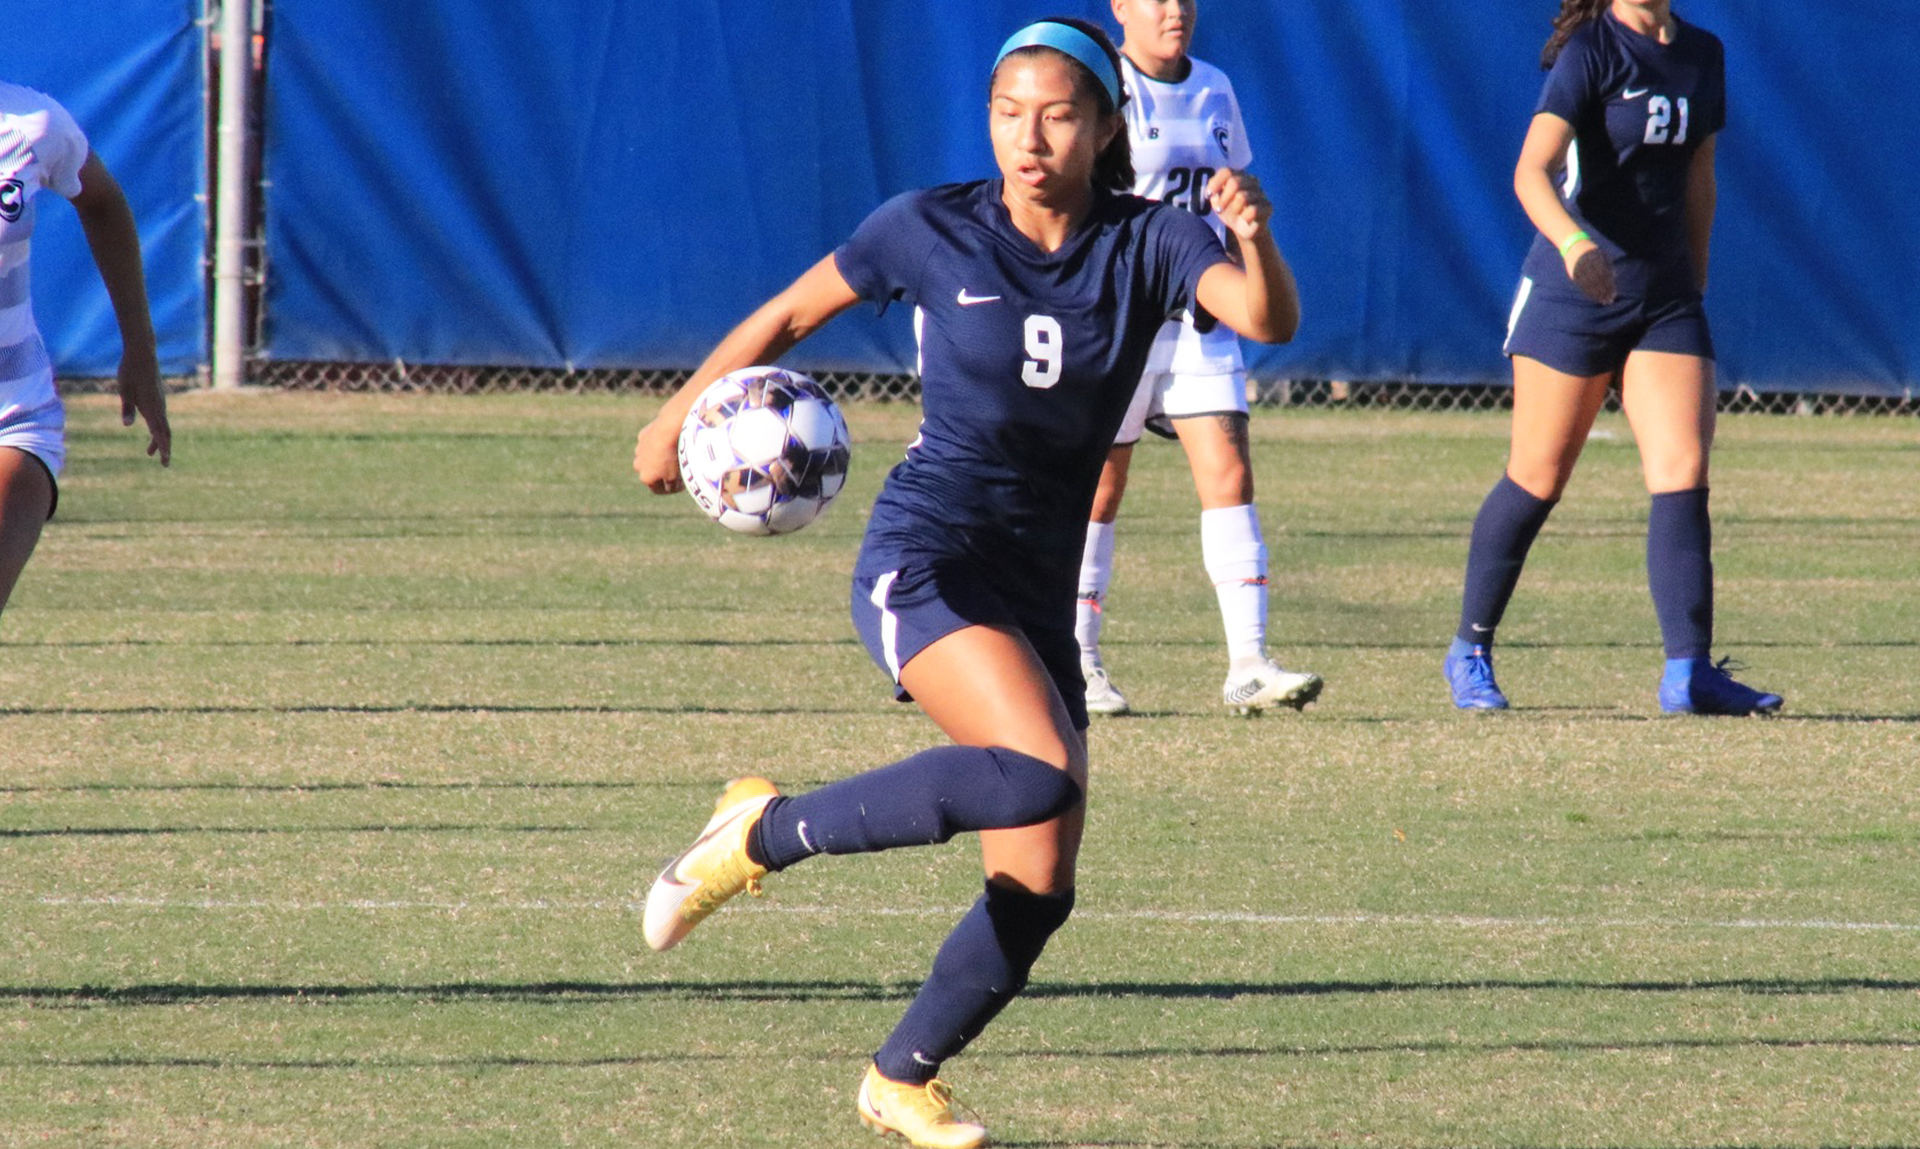 Ashley Bautista tallied the assist for Tuesday's win.